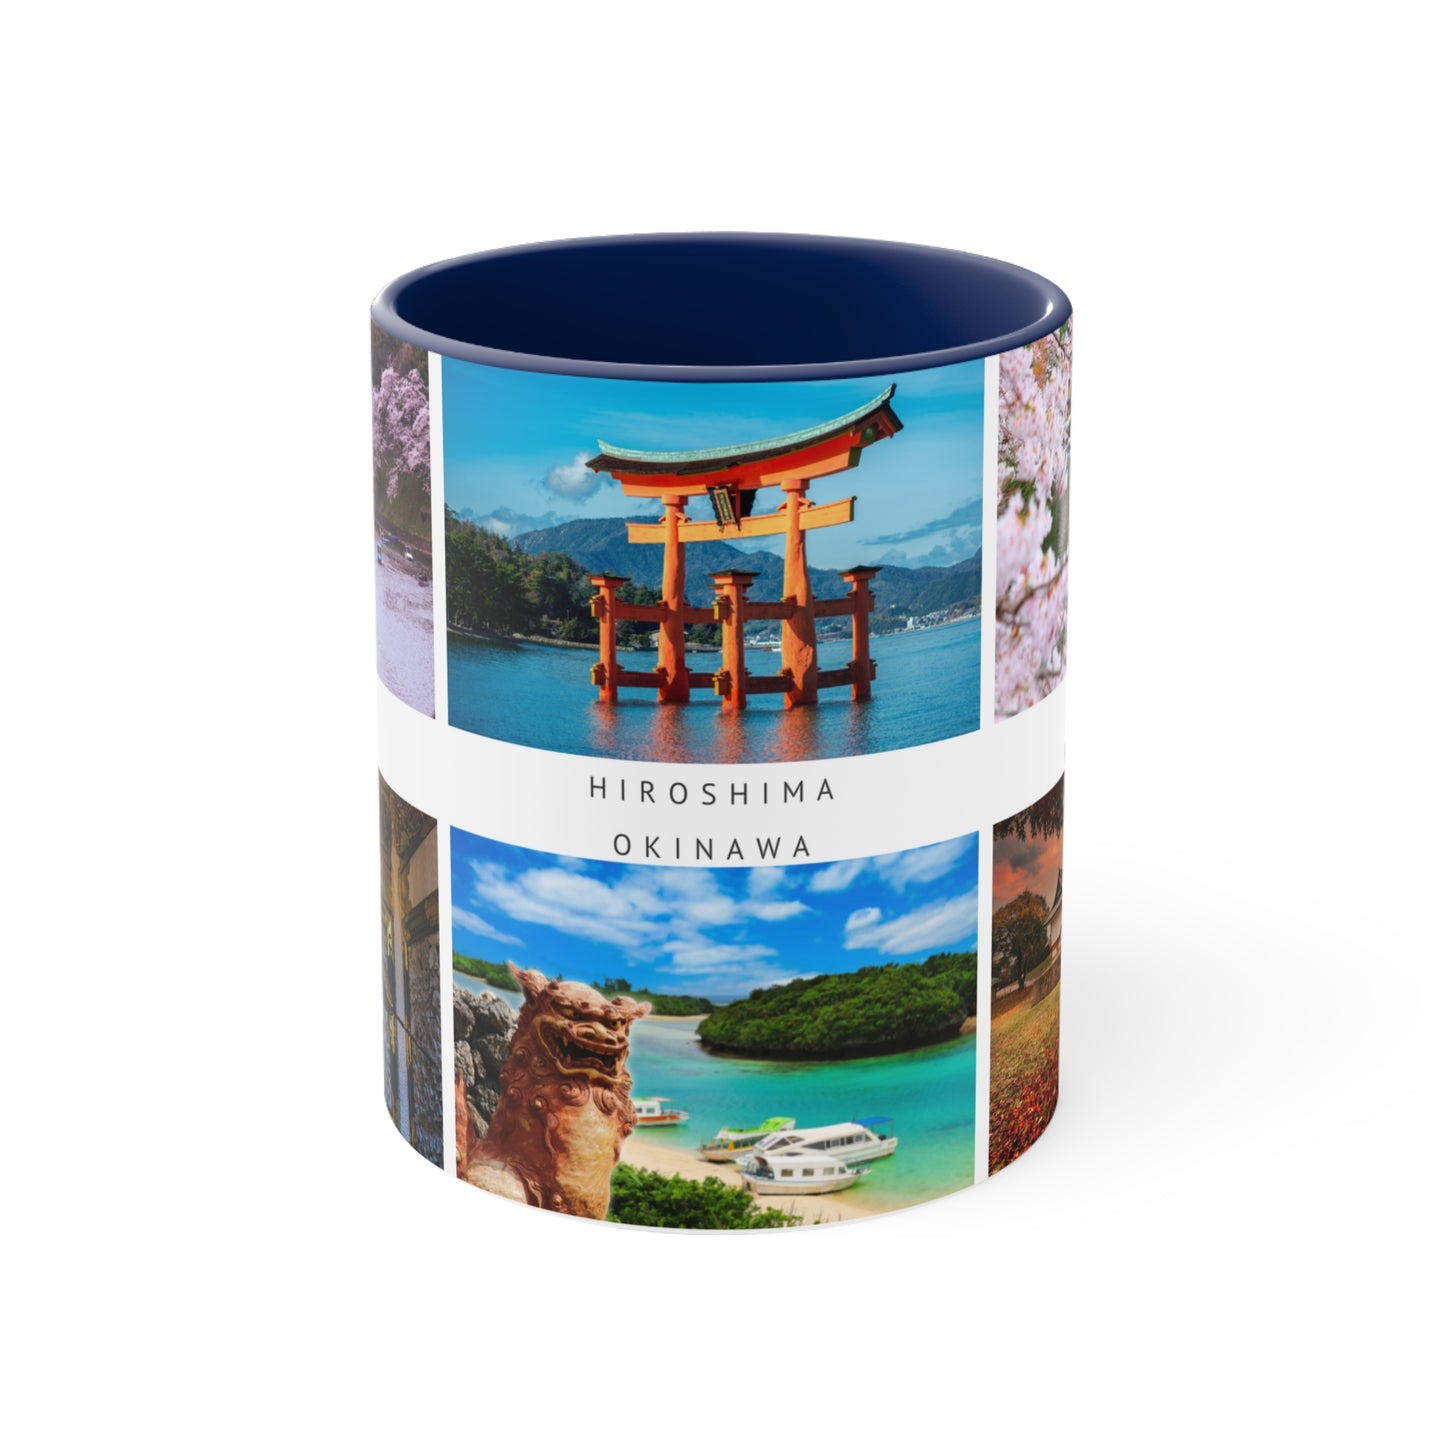 Japan! This Travel Accent Coffee Mug is a part of a Travel Series for you to choose from. 11oz. Great as a gift or get one to enjoy yourself.